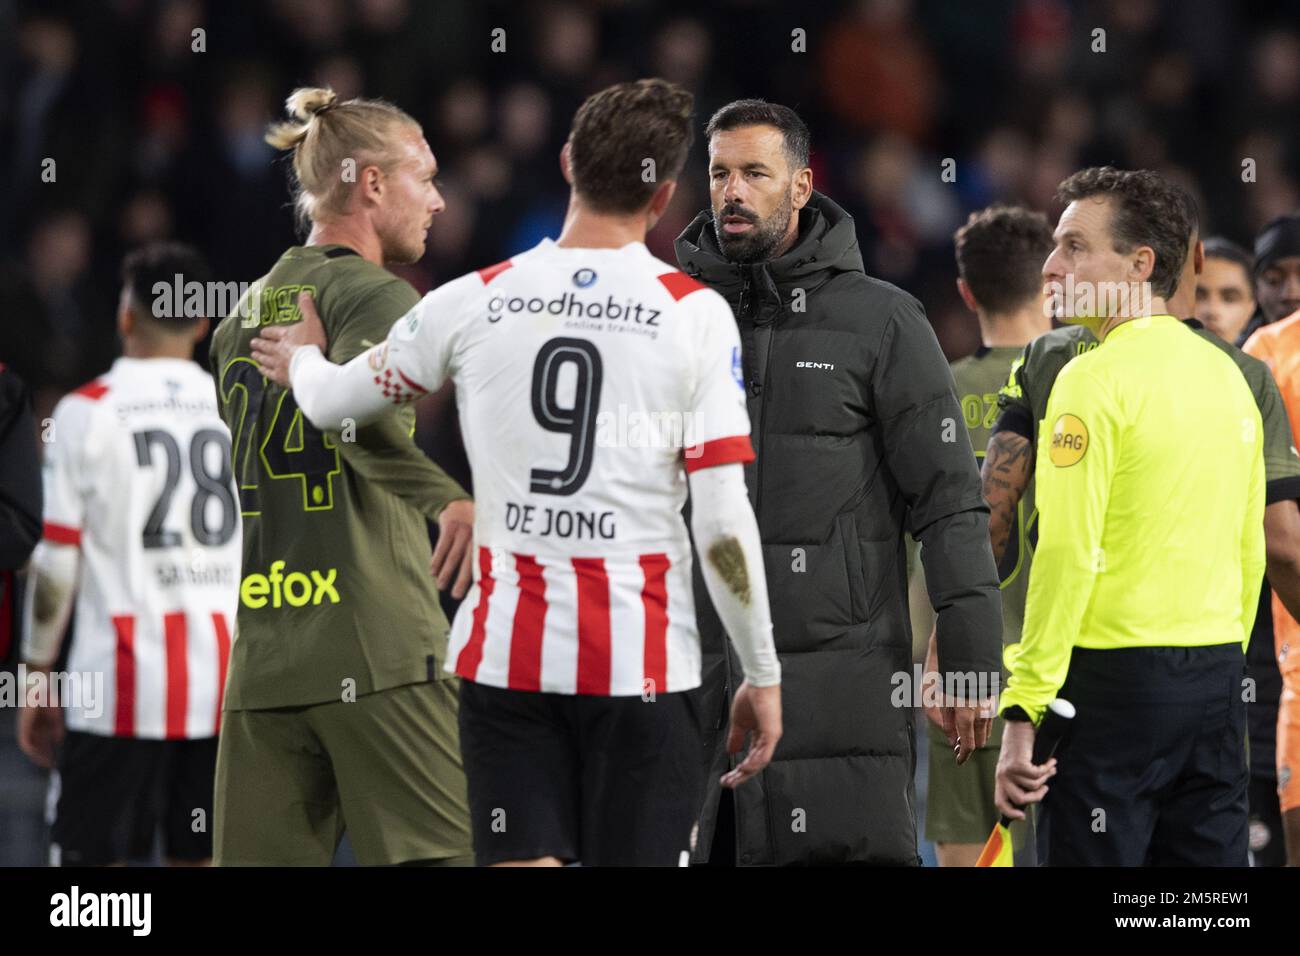 EINDHOVEN, coach Ruud van Nistelrooy of PSV after the practice match in the Philips stadium against AC Milan. ANP OLAF KRAAK Stock Photo